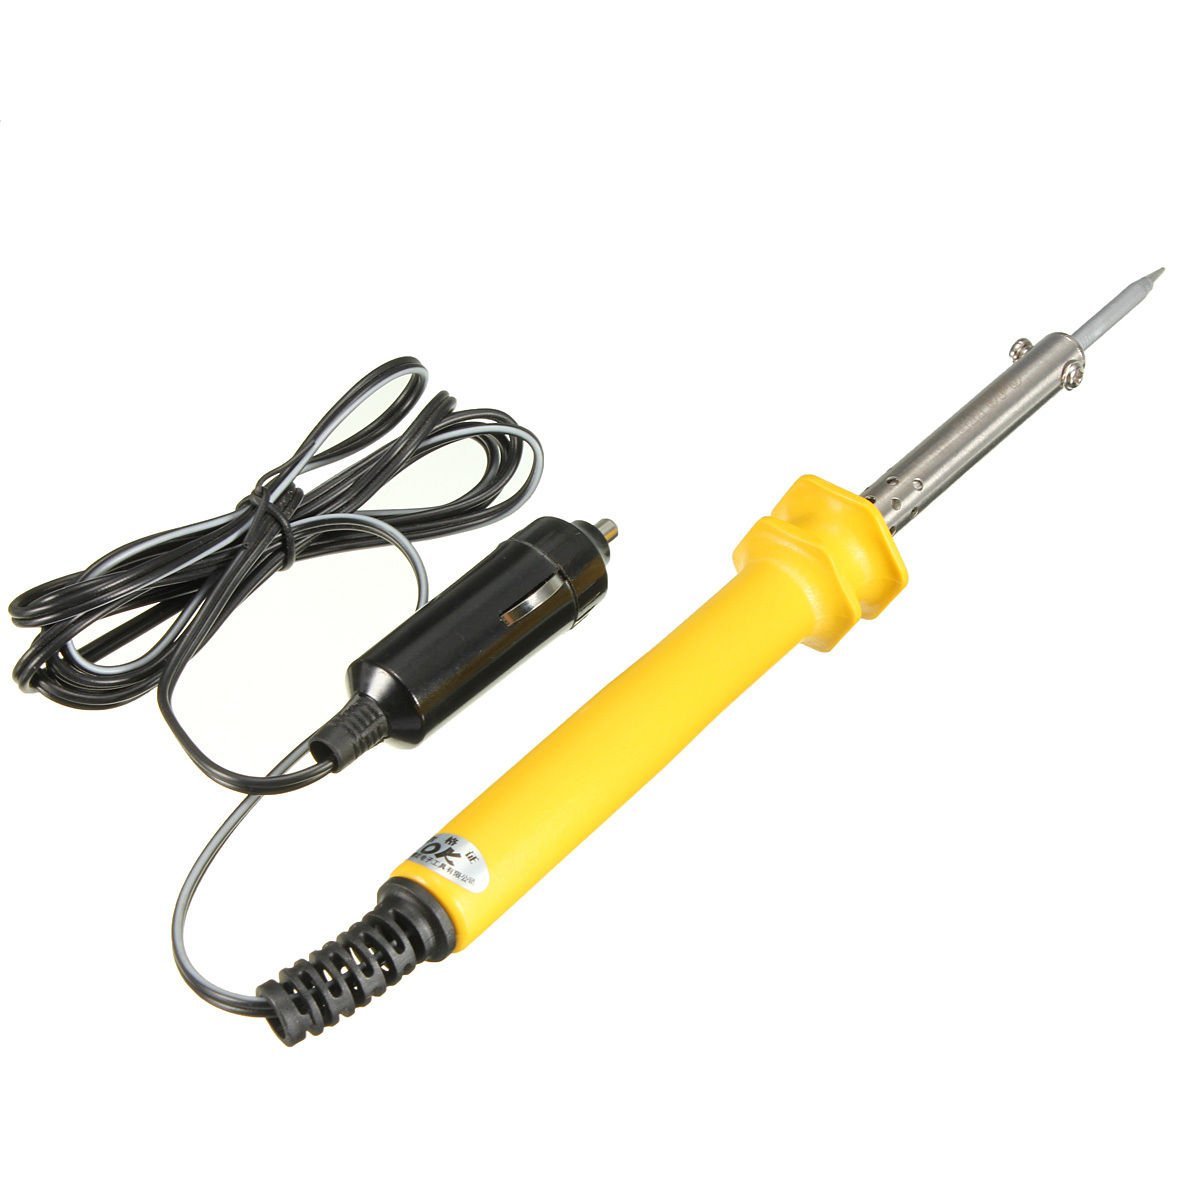 GJ-DC-12V-30W-Low-Voltage-Bevel-eEectric-Soldering-Iron-Fitted-with-Cigarette-Lighter-Plug-for-Auto--1135259-2